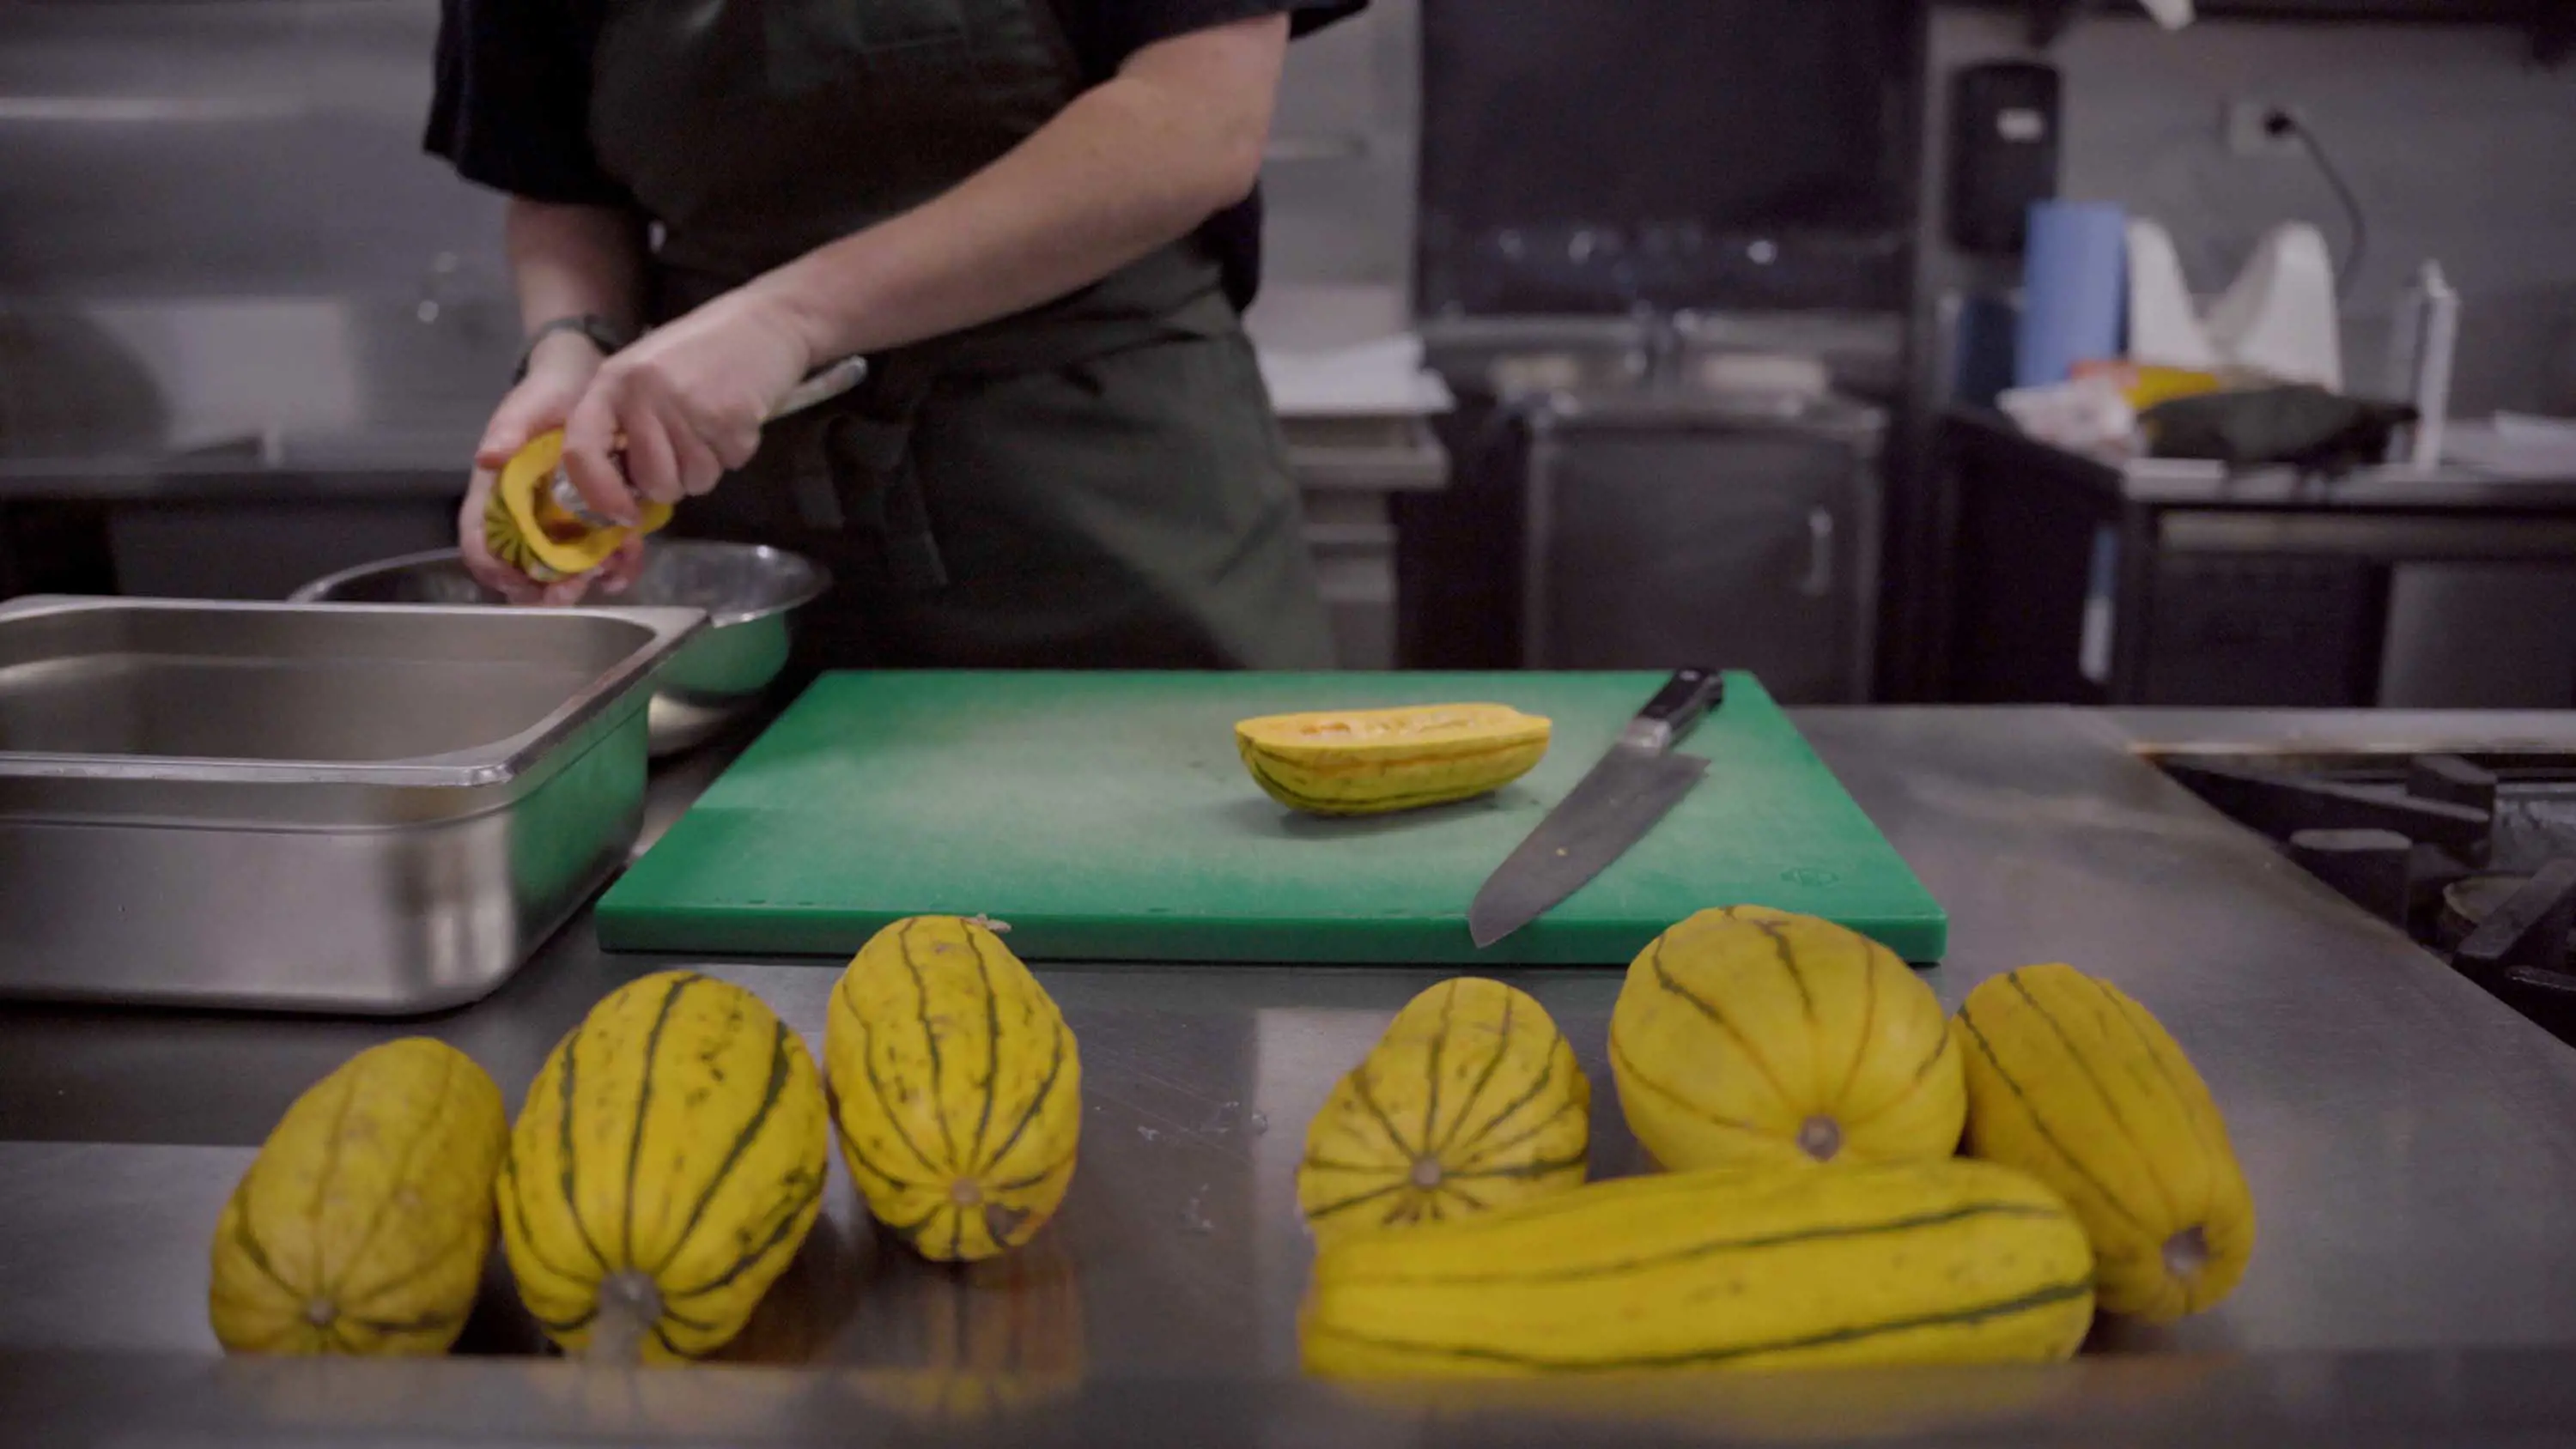 7 Delicata squash sit on a stainless steel cooking benchtop in the foreground. A chef scoops out the seeds of the yellow squash using a spoon.